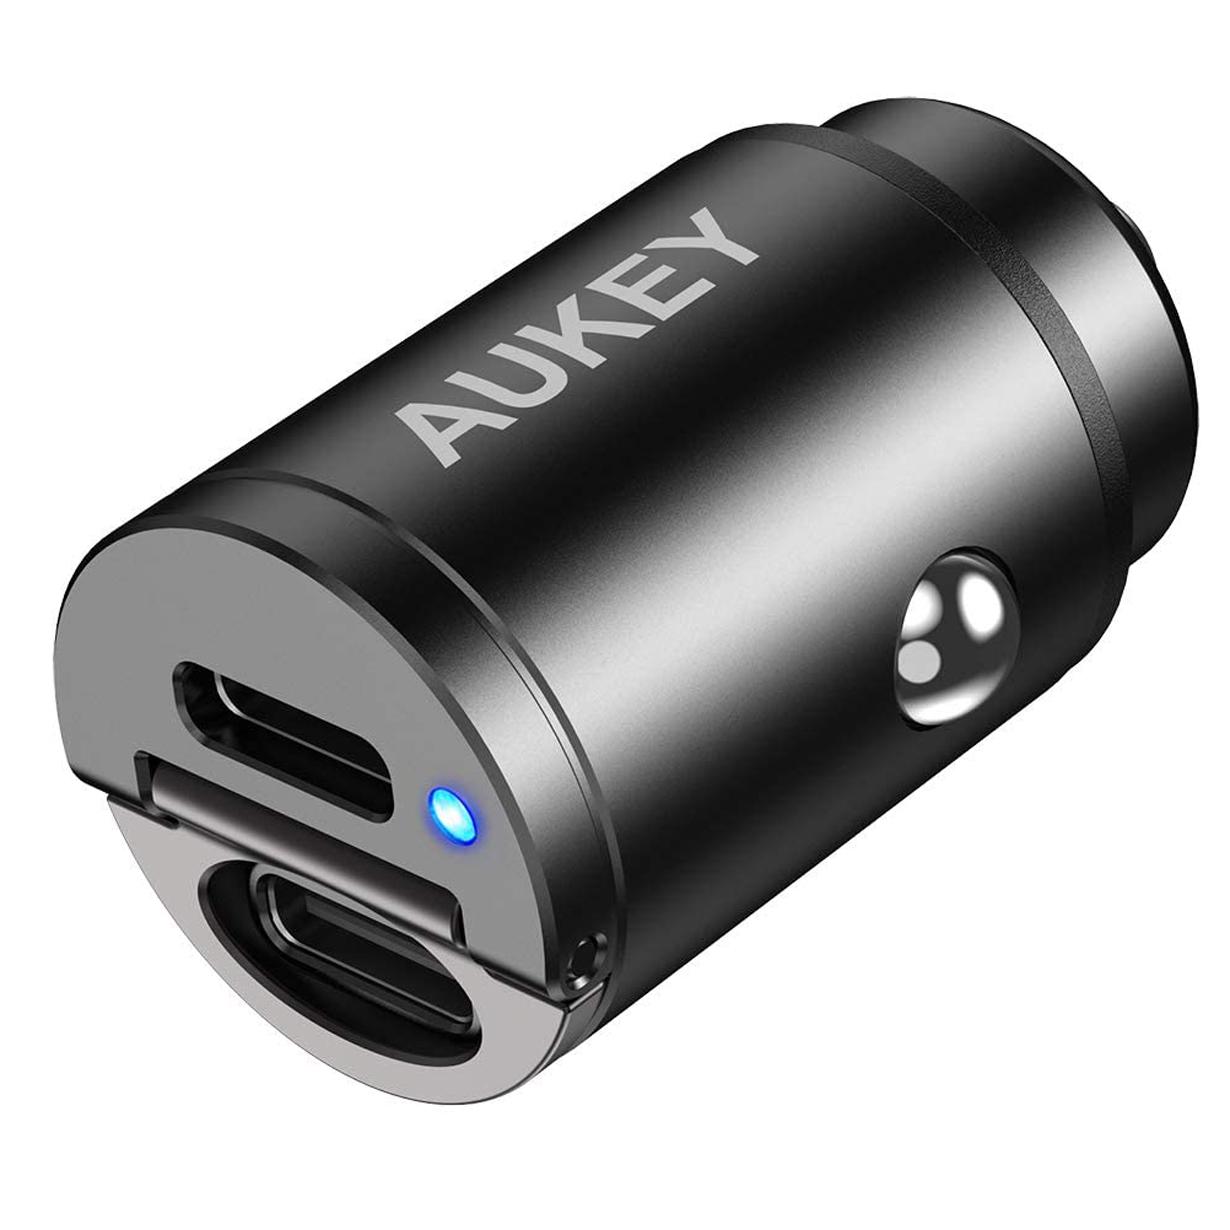 Aukey 30W PD Dual Port USB-C Car Charger for $12.74